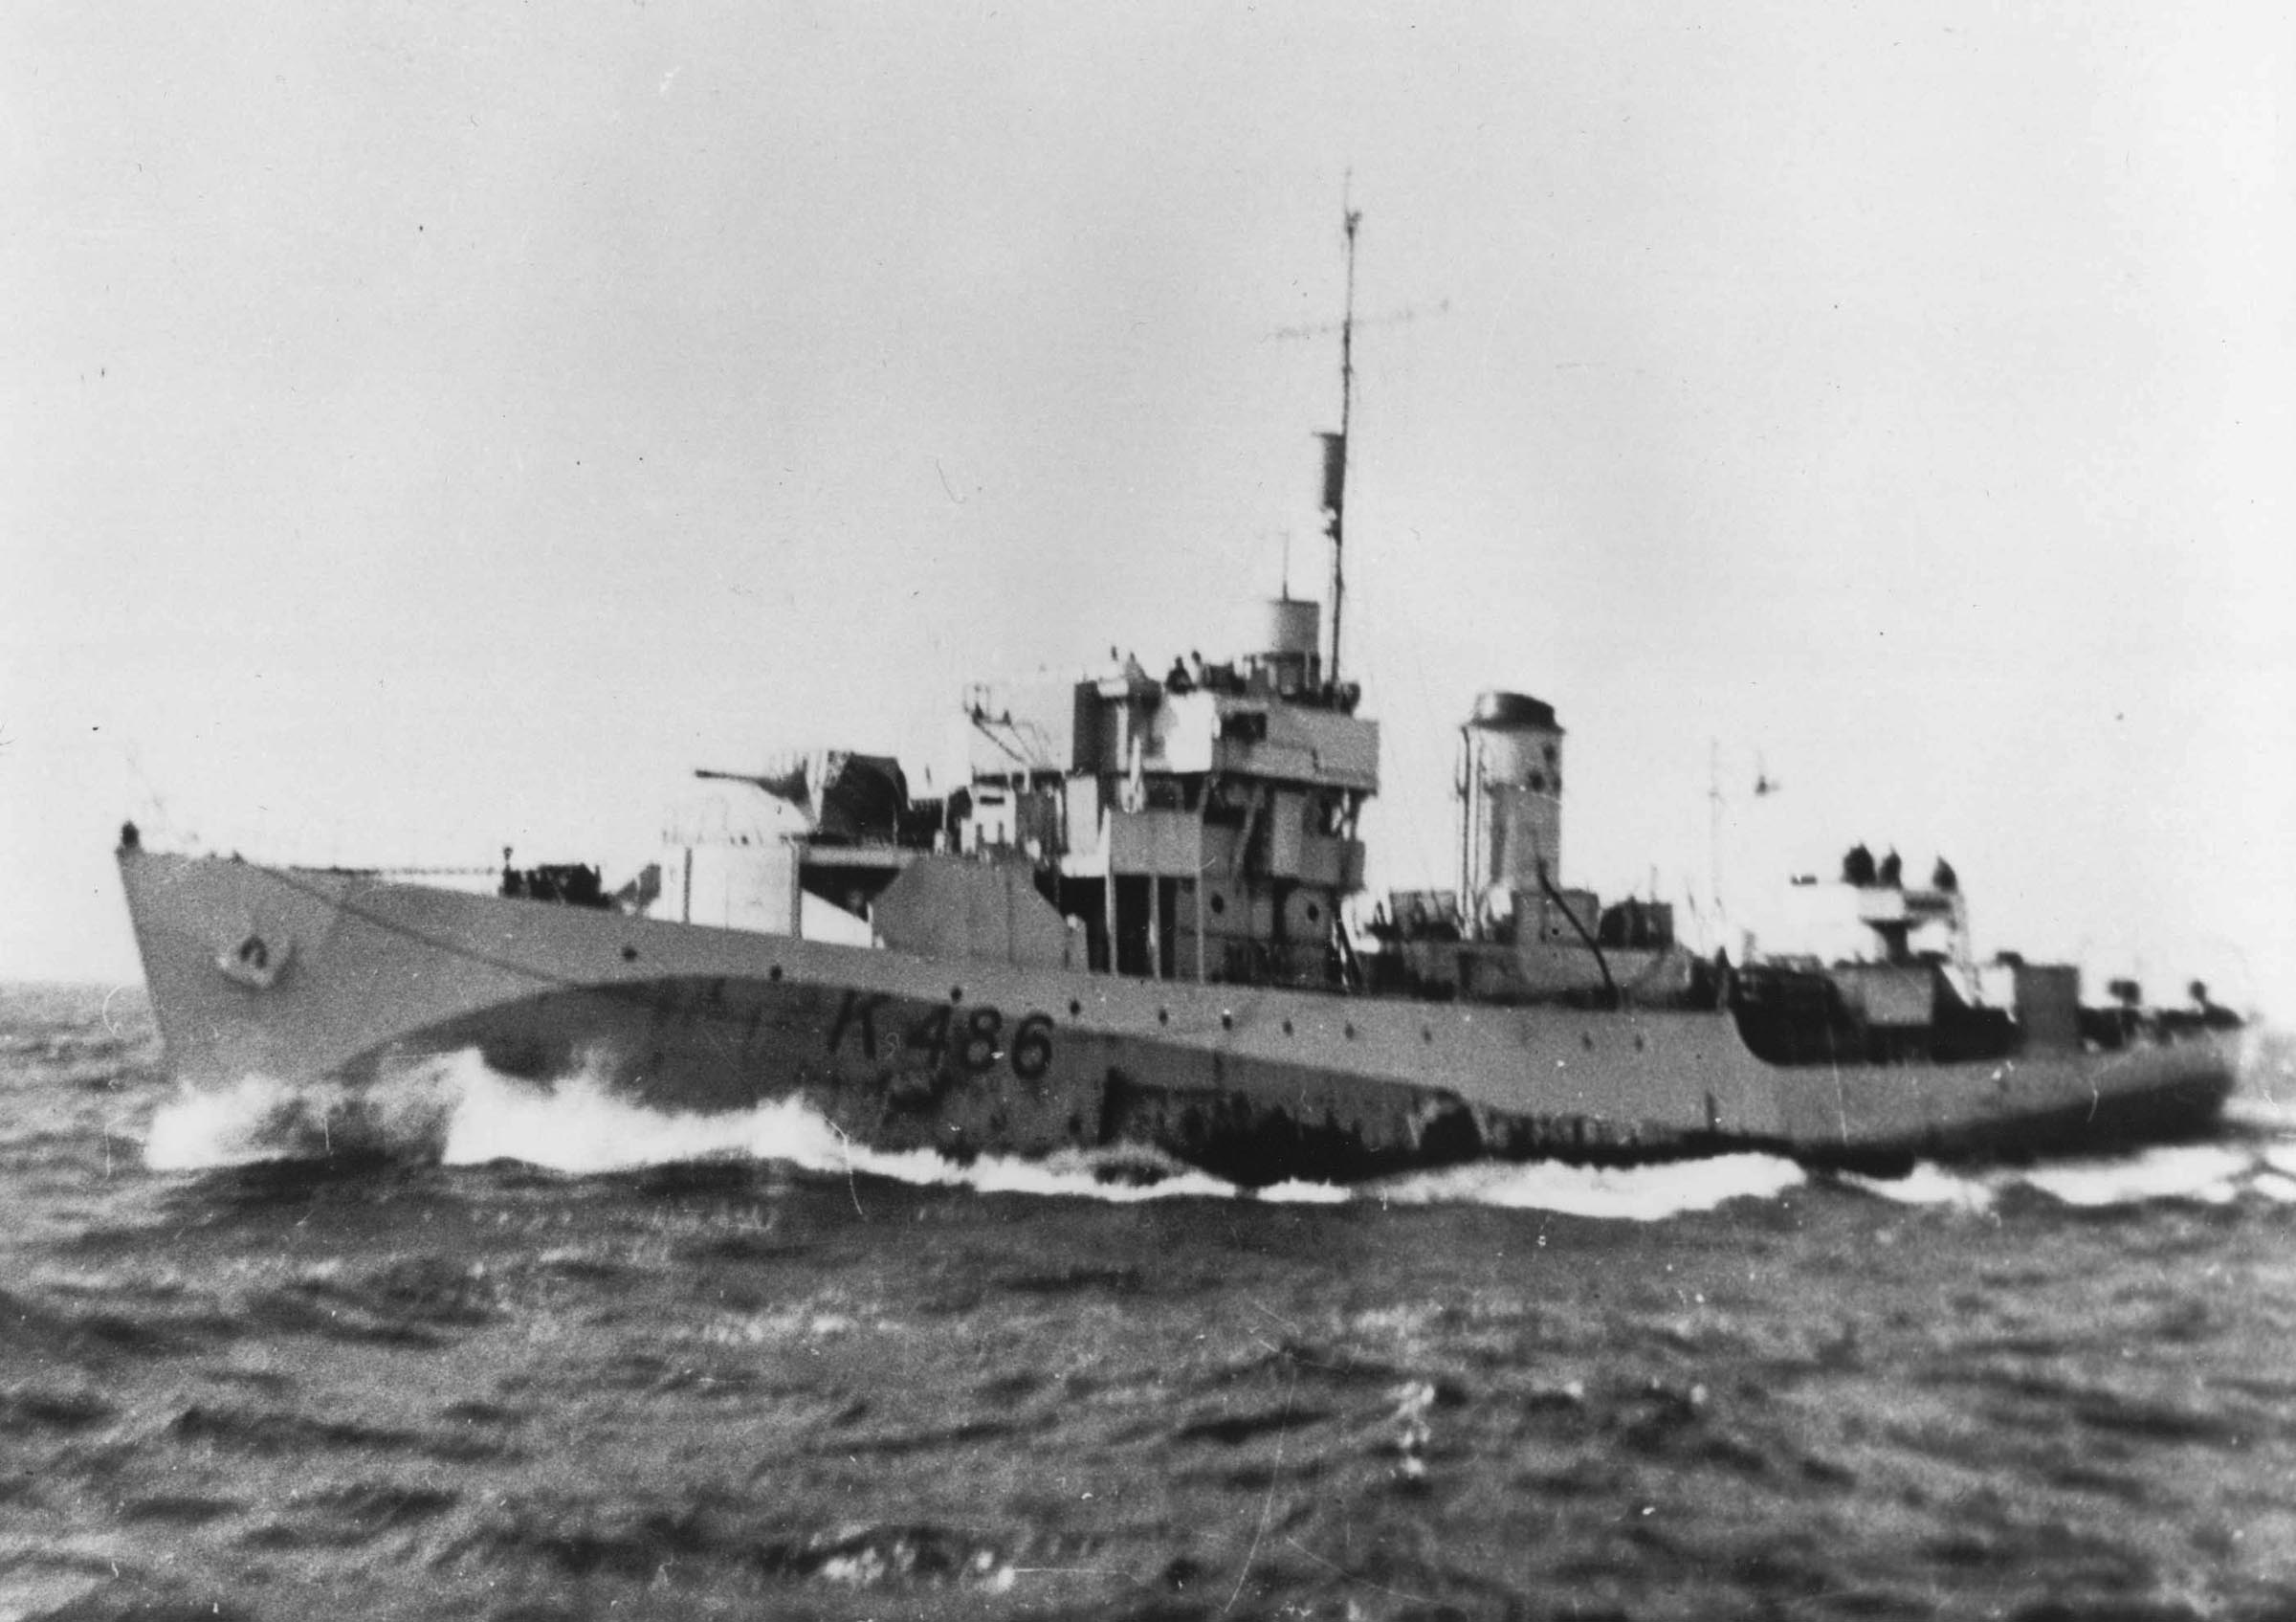 HMCS FOREST HILL